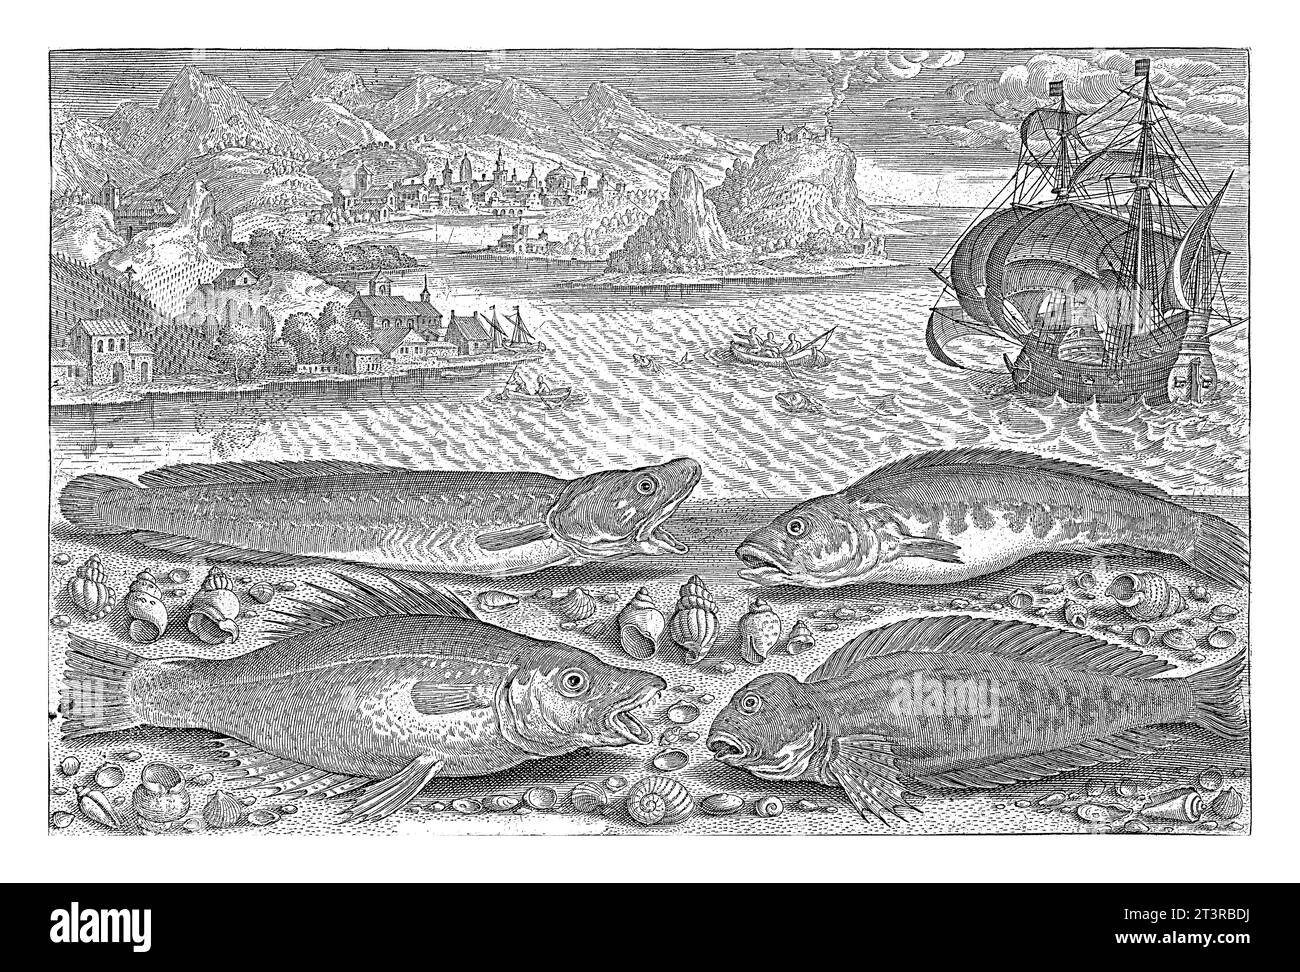 Four fish on the beach, Adriaen Collaert, 1627 - 1636 A gaff cod, a grouper, a horned blenny and a black fish are washed up on the beach along with so Stock Photo